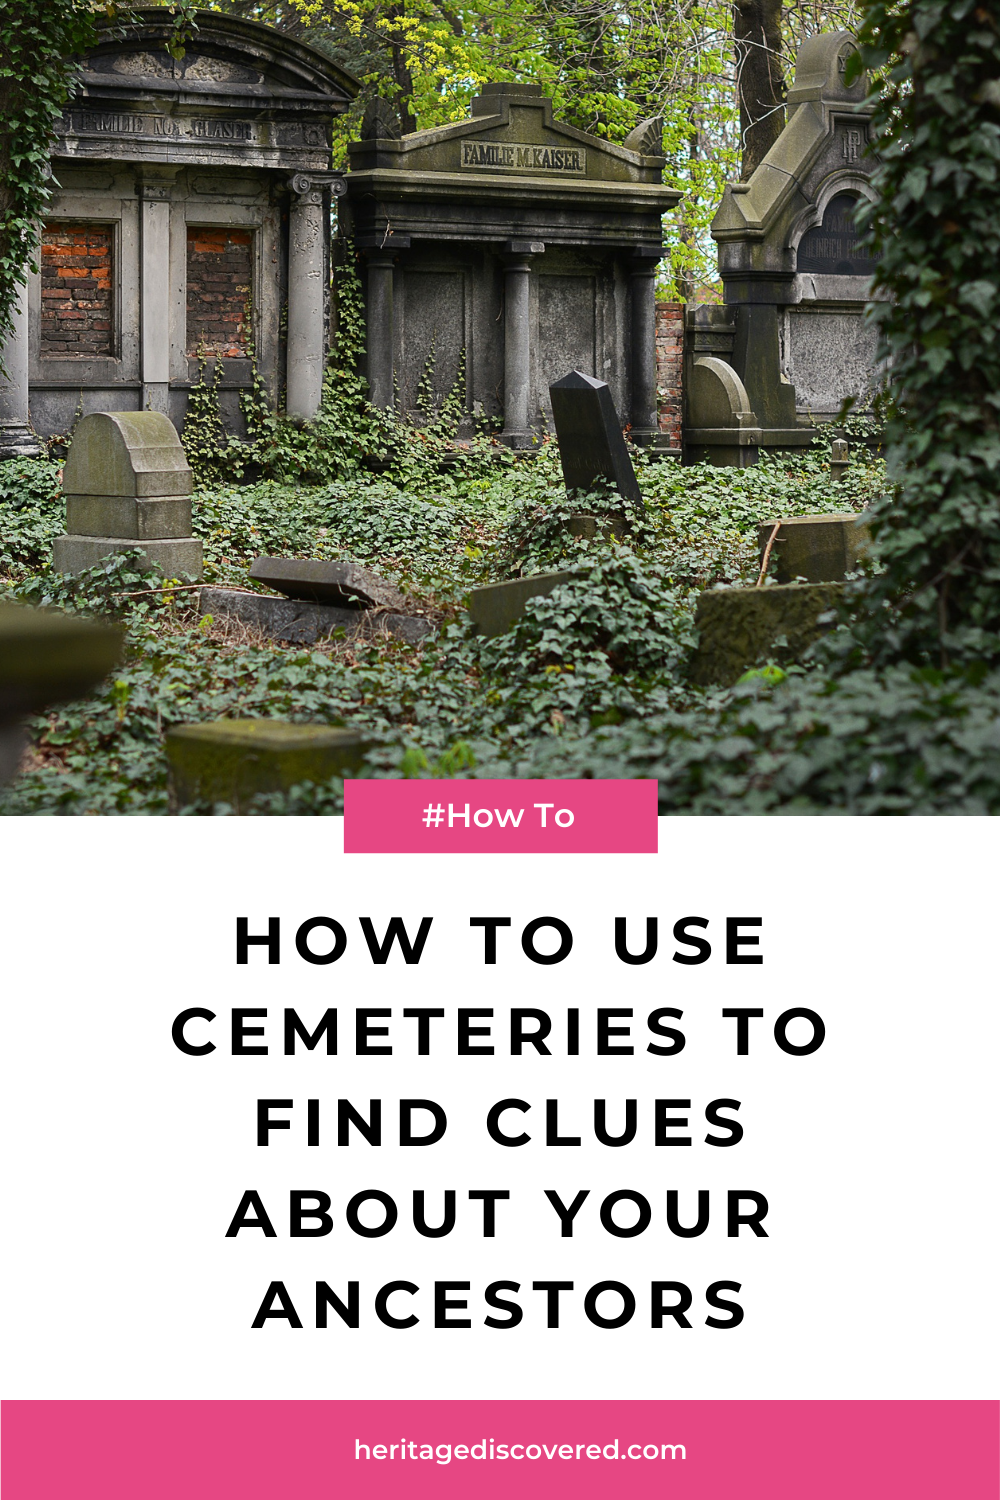 genealogy-research-in-cemeteries-1